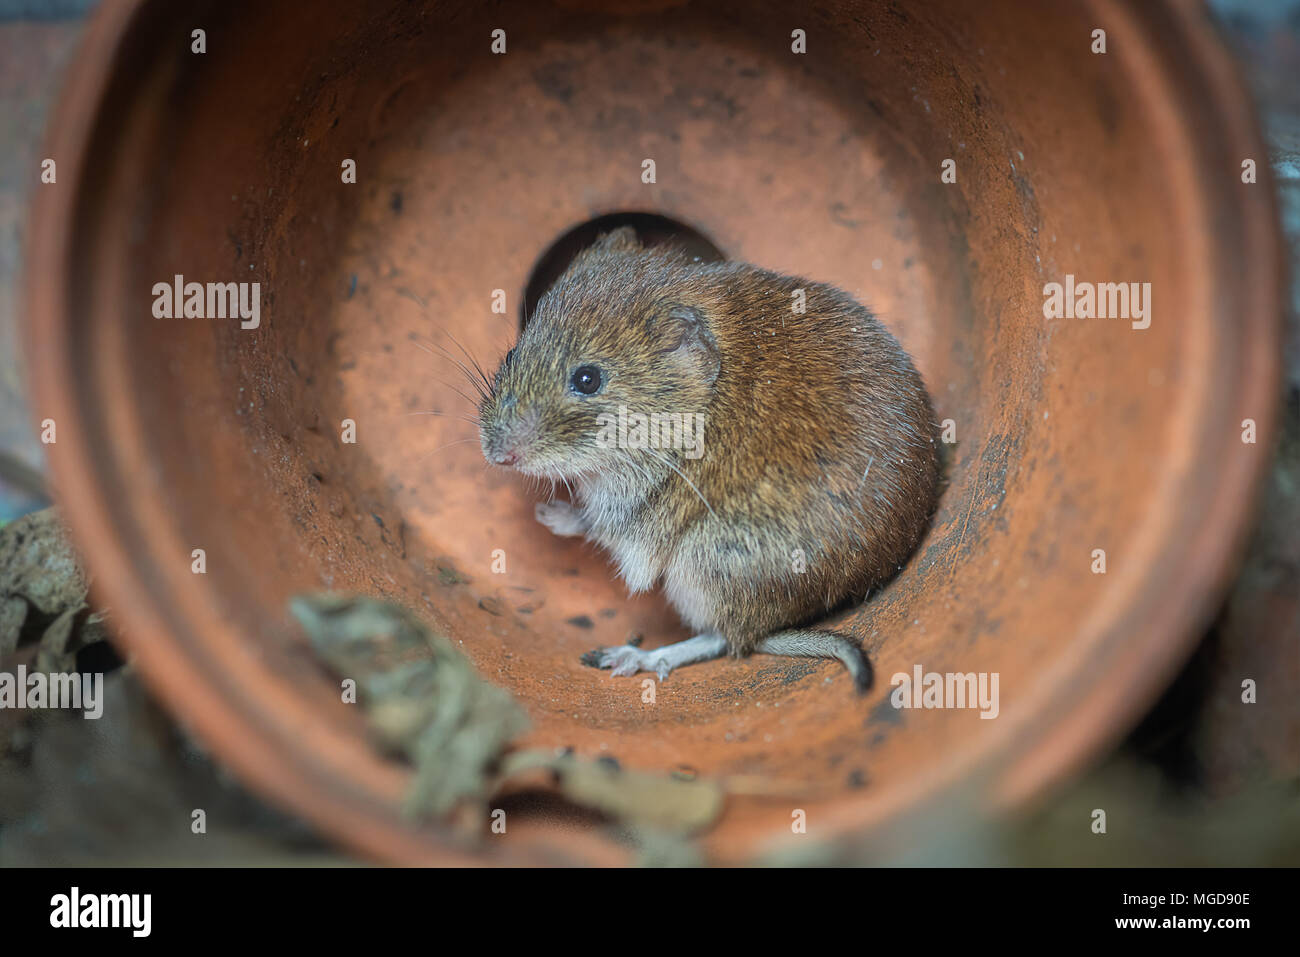 A close up photograph pf a small bank vole rodent hiding from predators in a fallen over plant pot Stock Photo